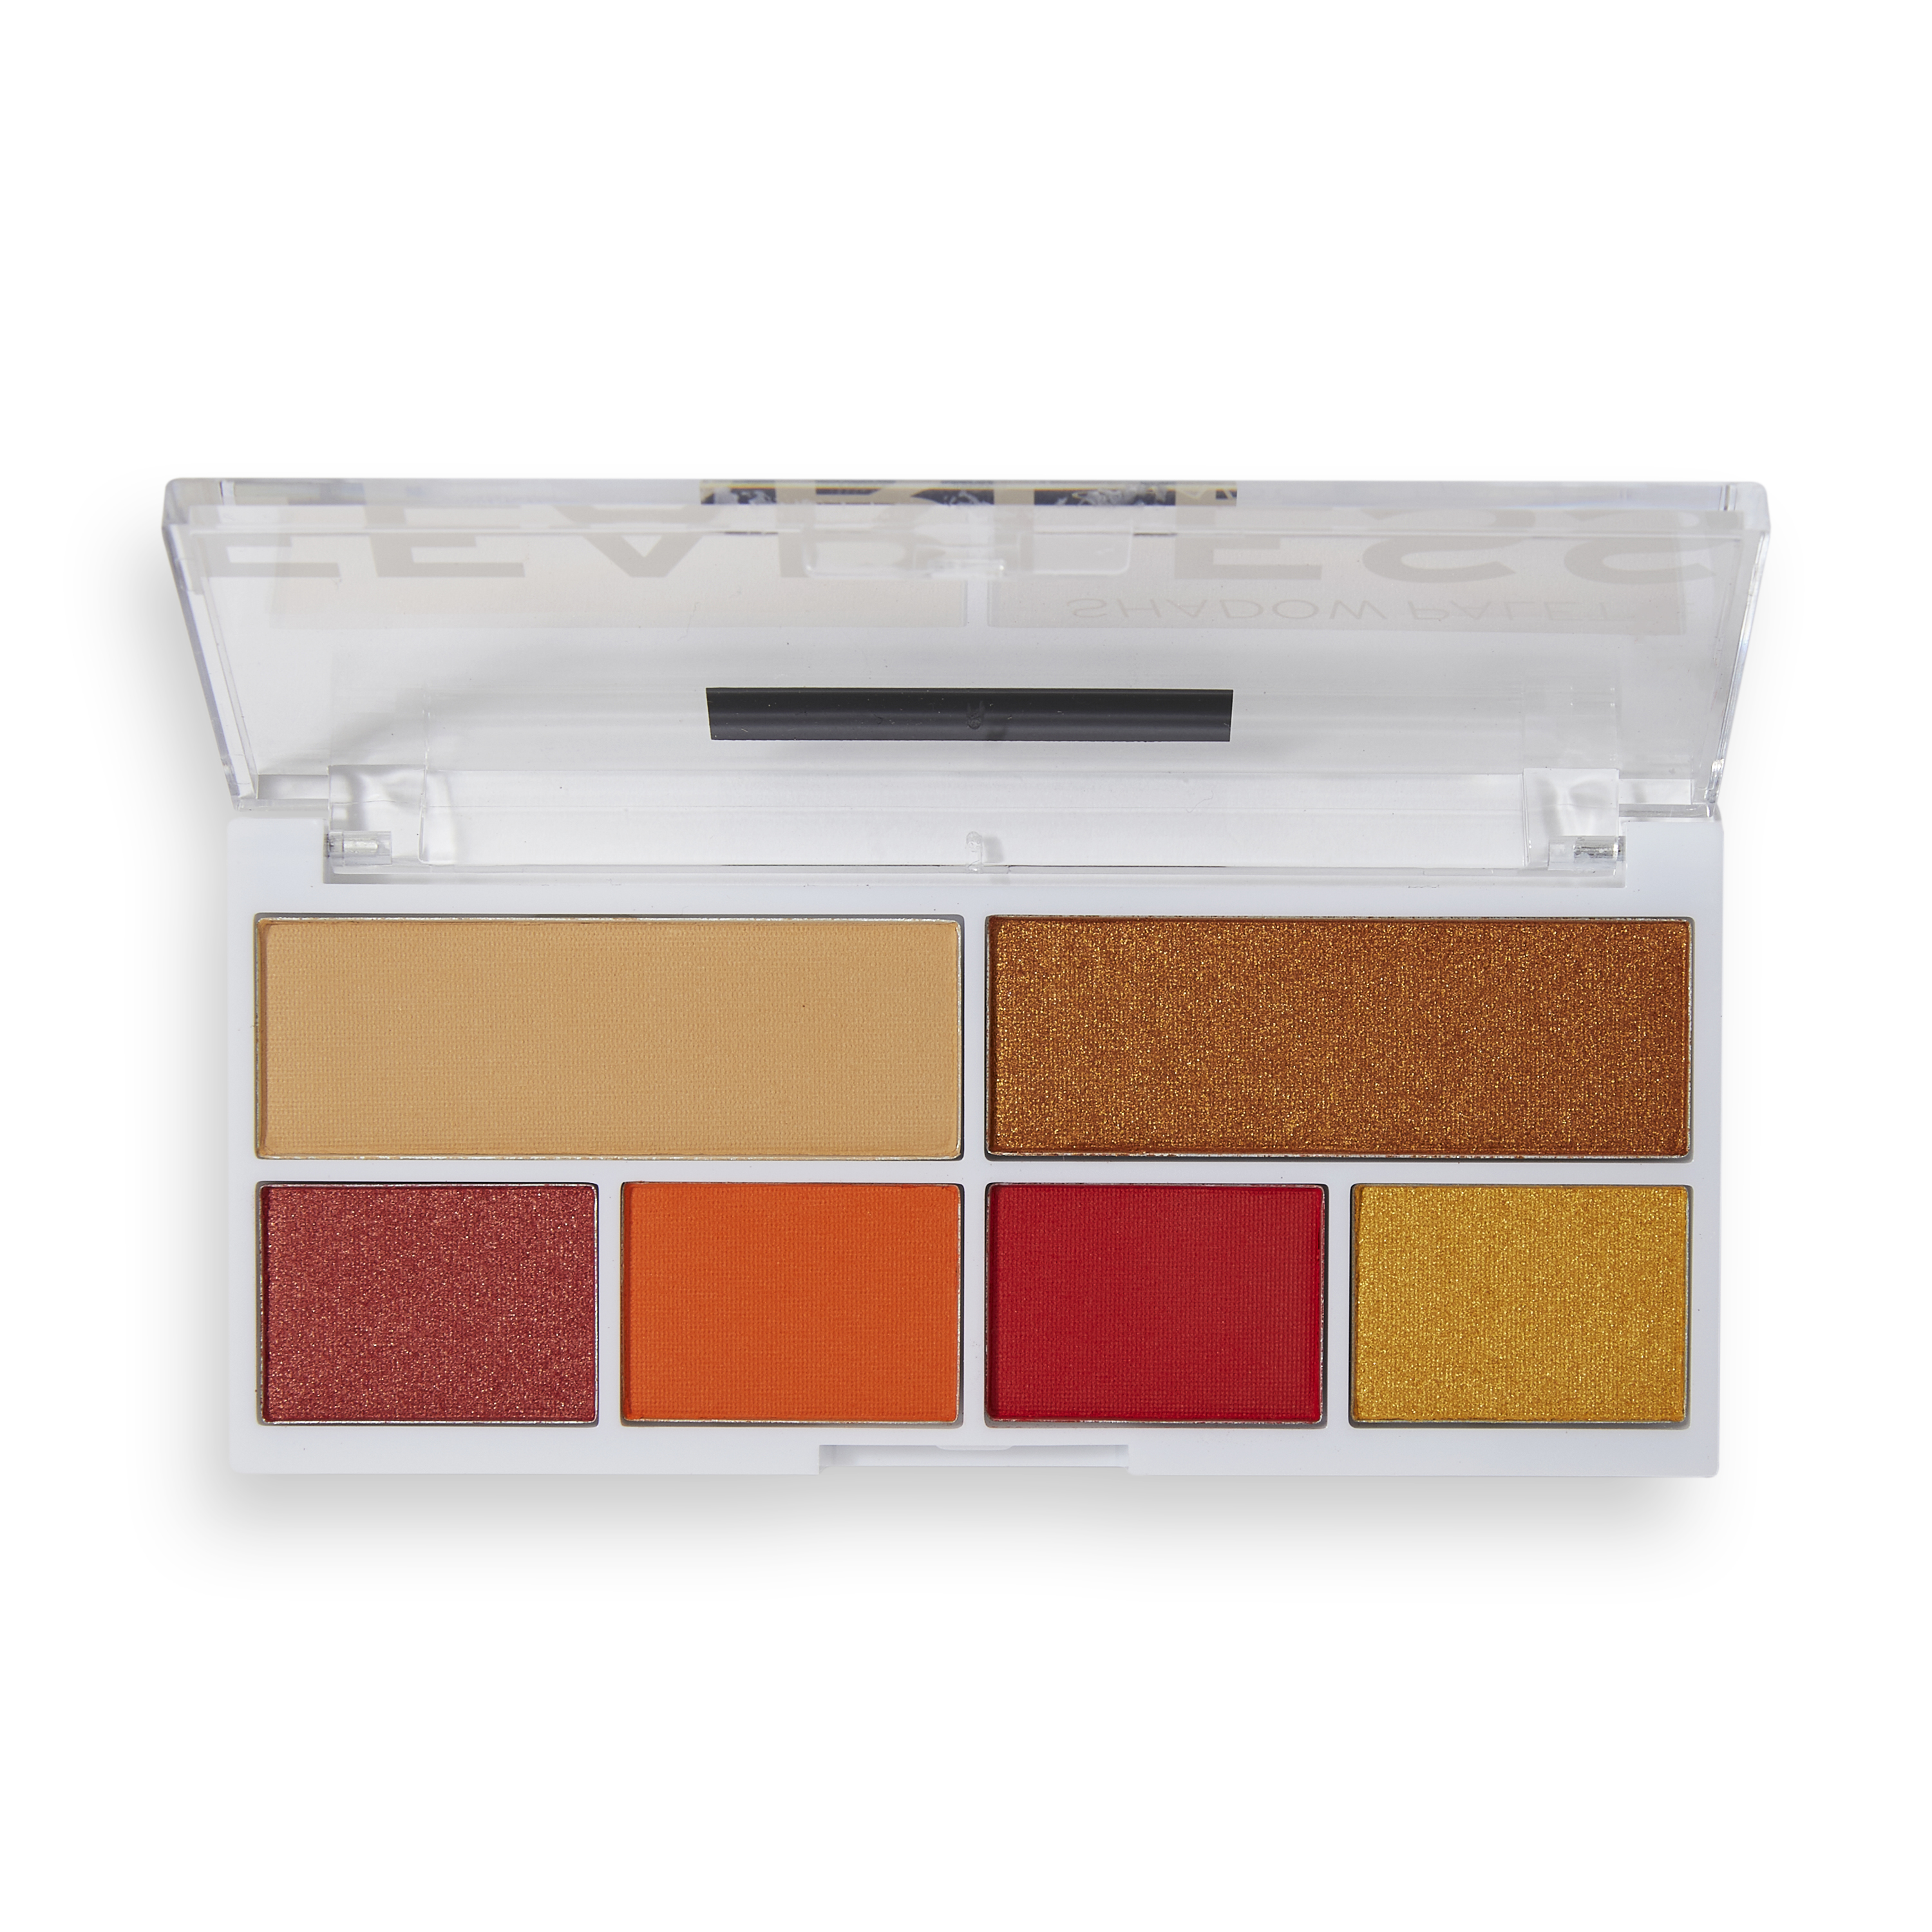 Relove by Revolution Colour Play Eyeshadow Palette - Fearless - image 4 of 5